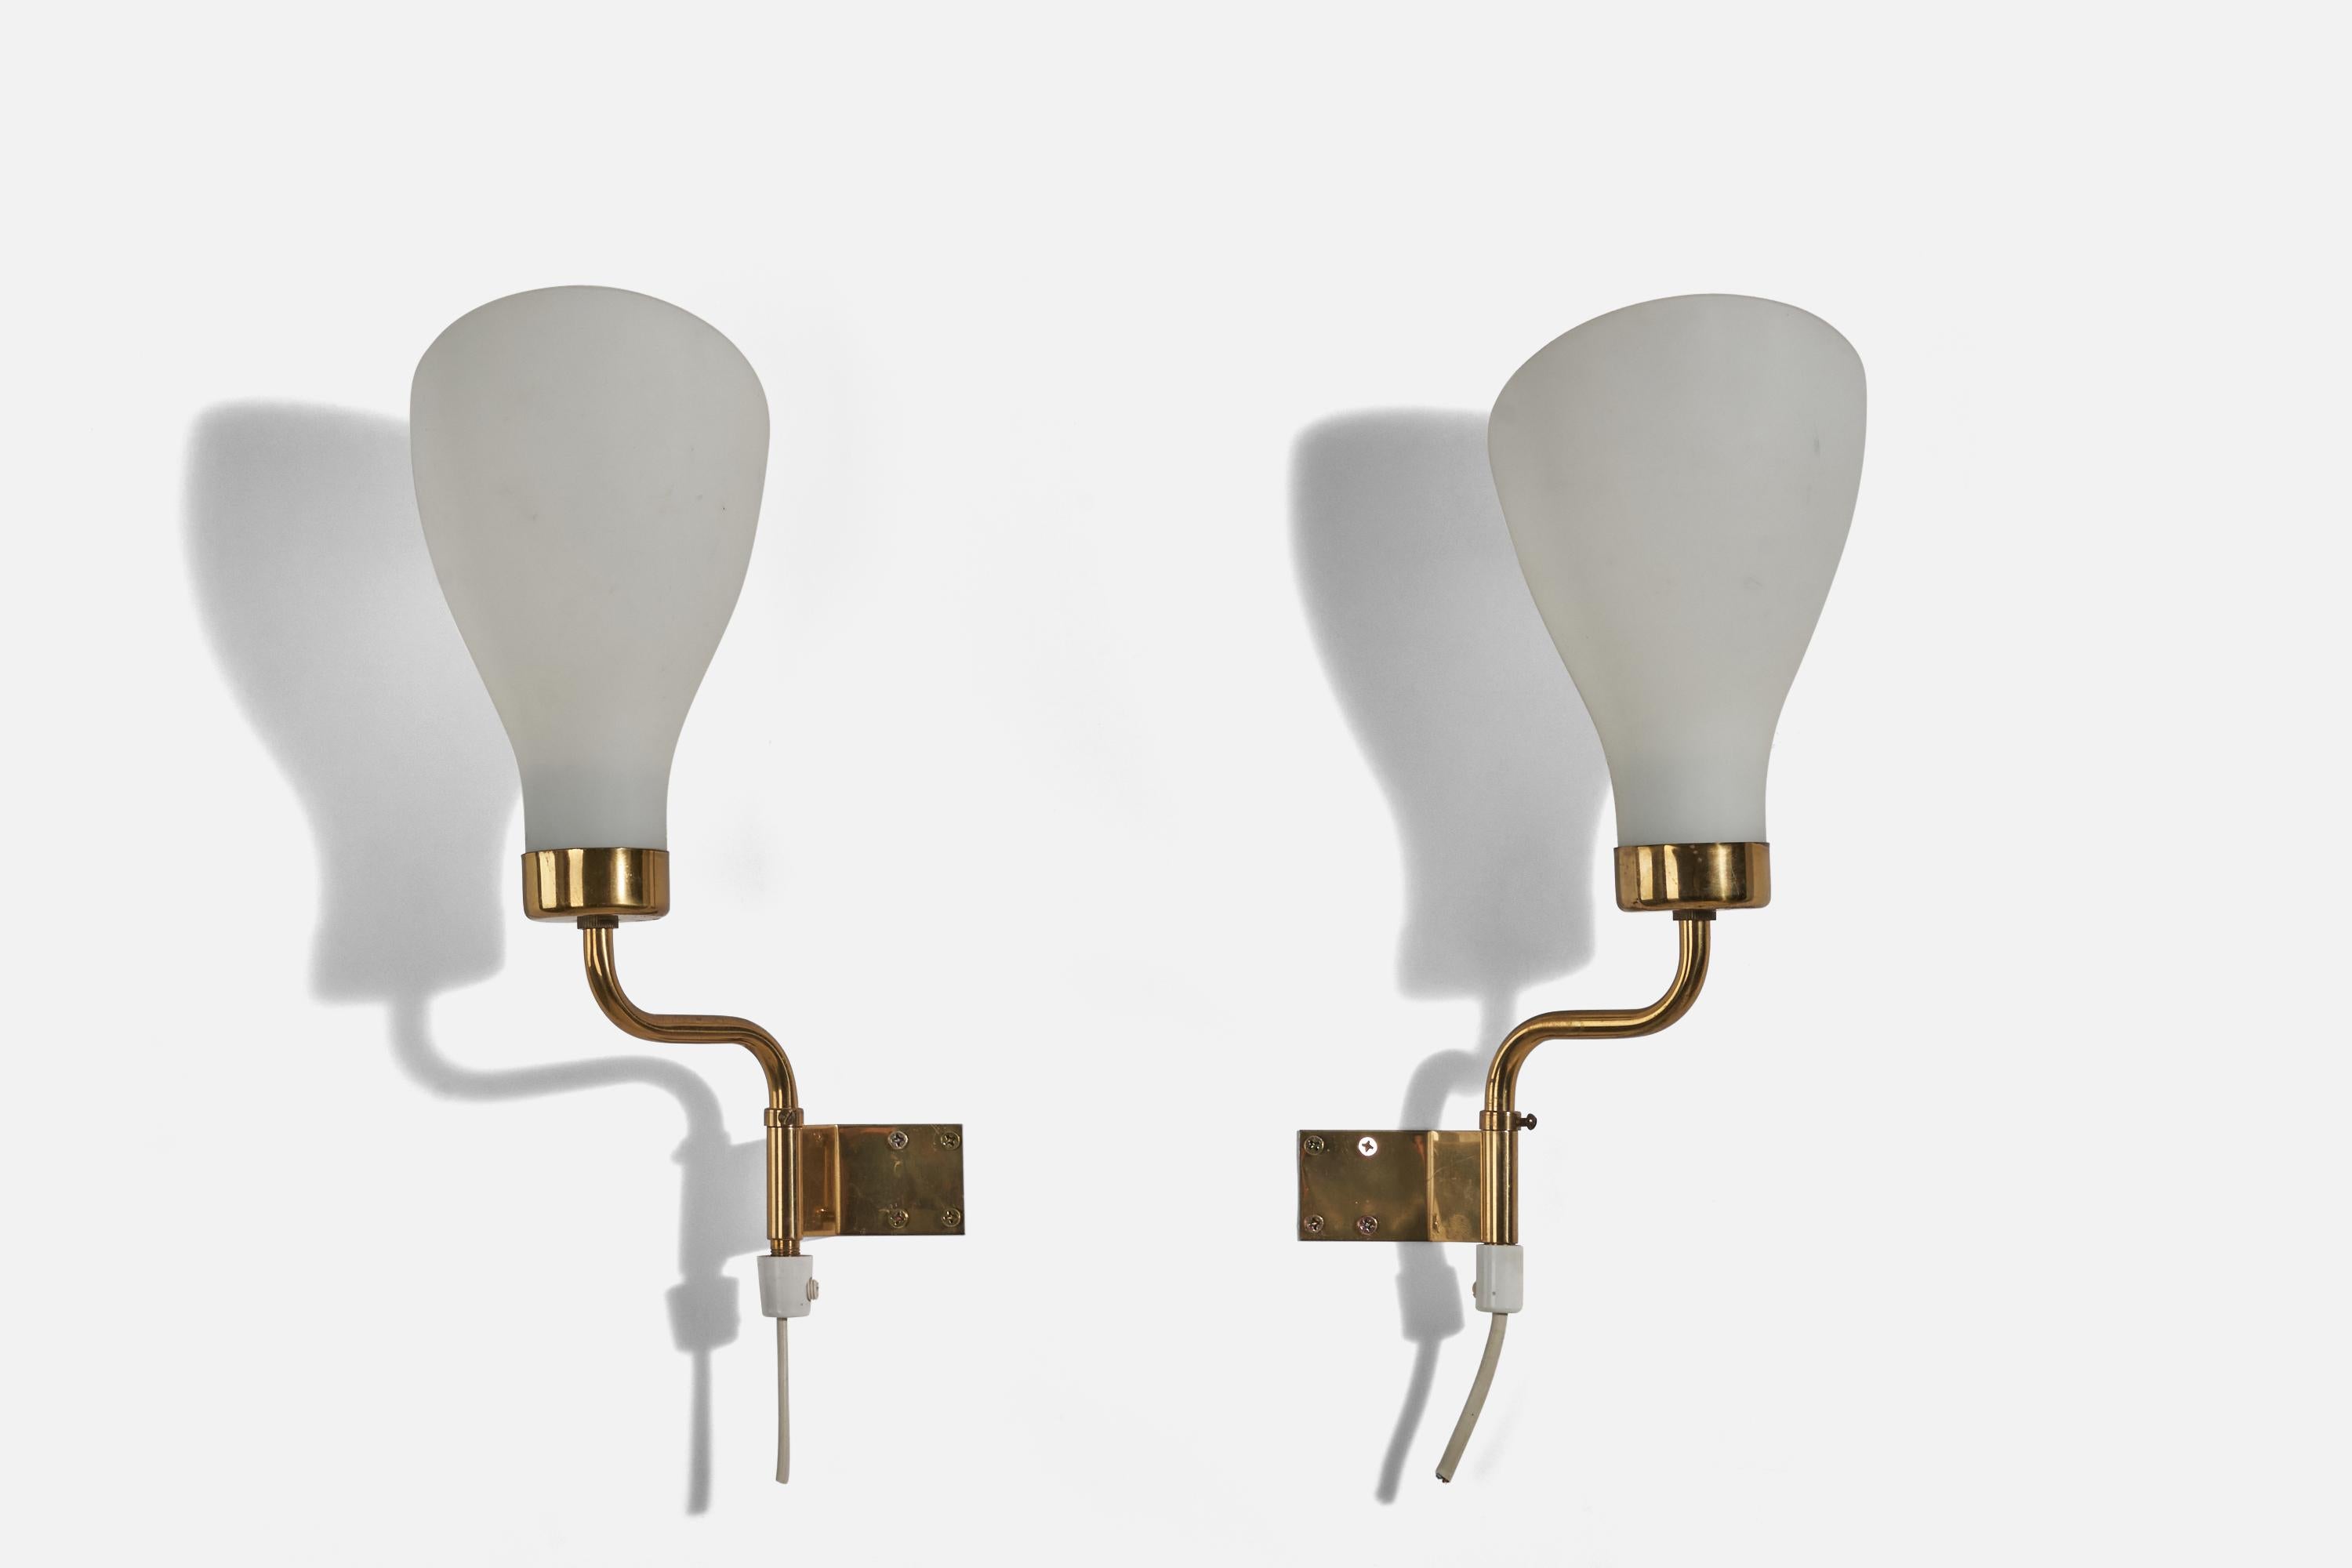 A pair of brass and glass sconces / wall lights designed and produced in Sweden, c. 1940s.

Dimensions of Back Plate (inches) : 1.4 x 2.5 x 0.04 (Height x Width x Depth).

Socket takes E-14 bulb.

There is no maximum wattage stated on the